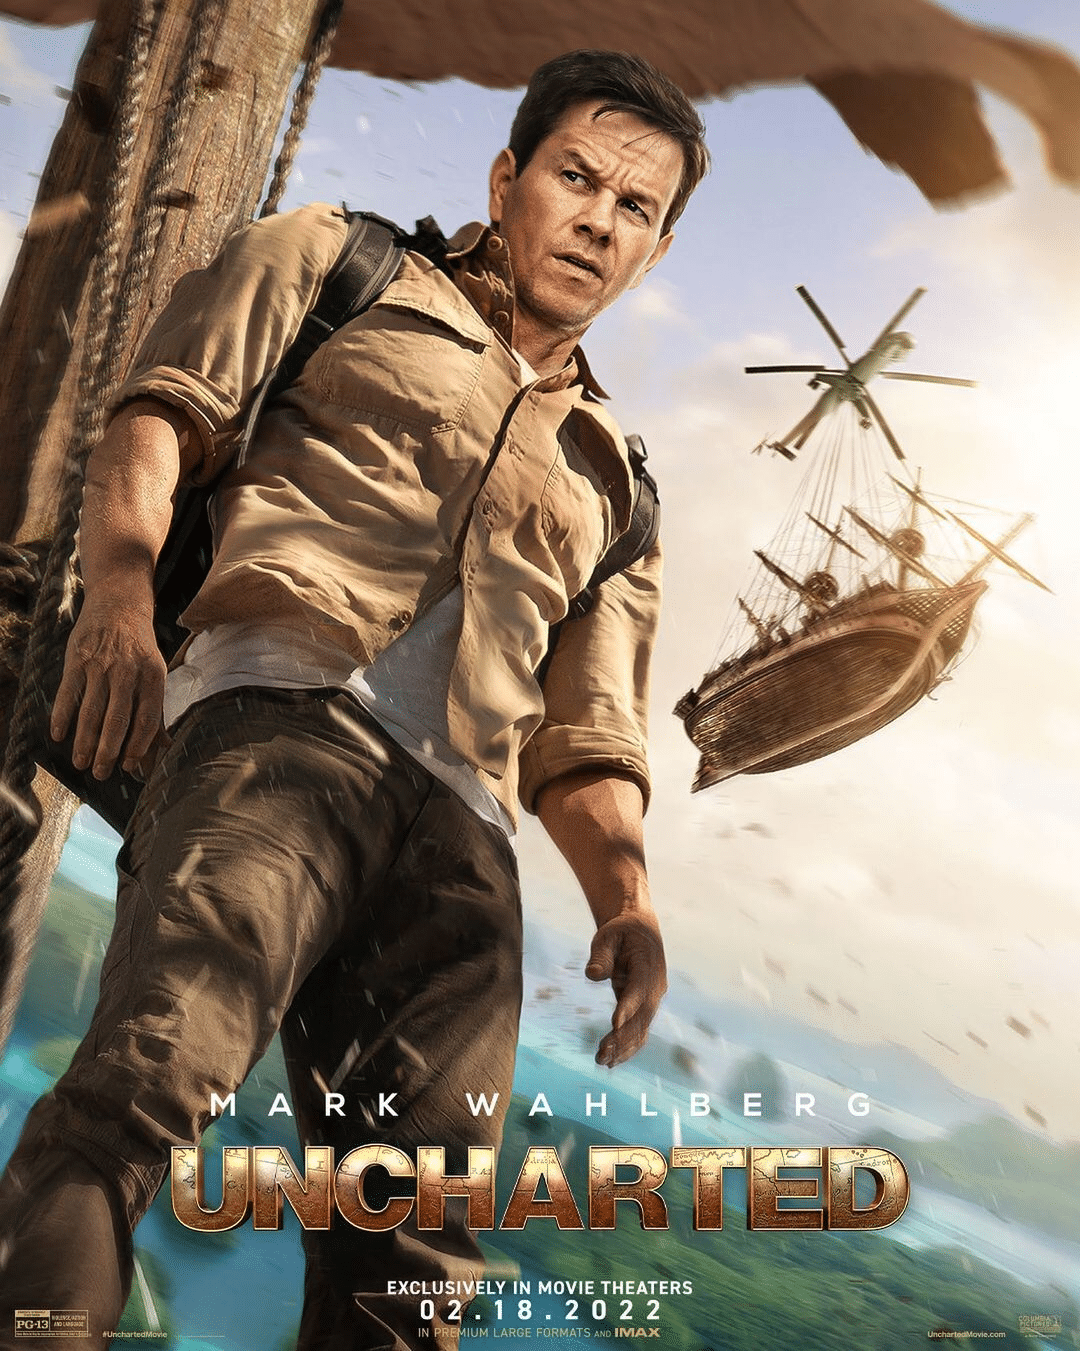 Review Uncharted, Fora do Mapa